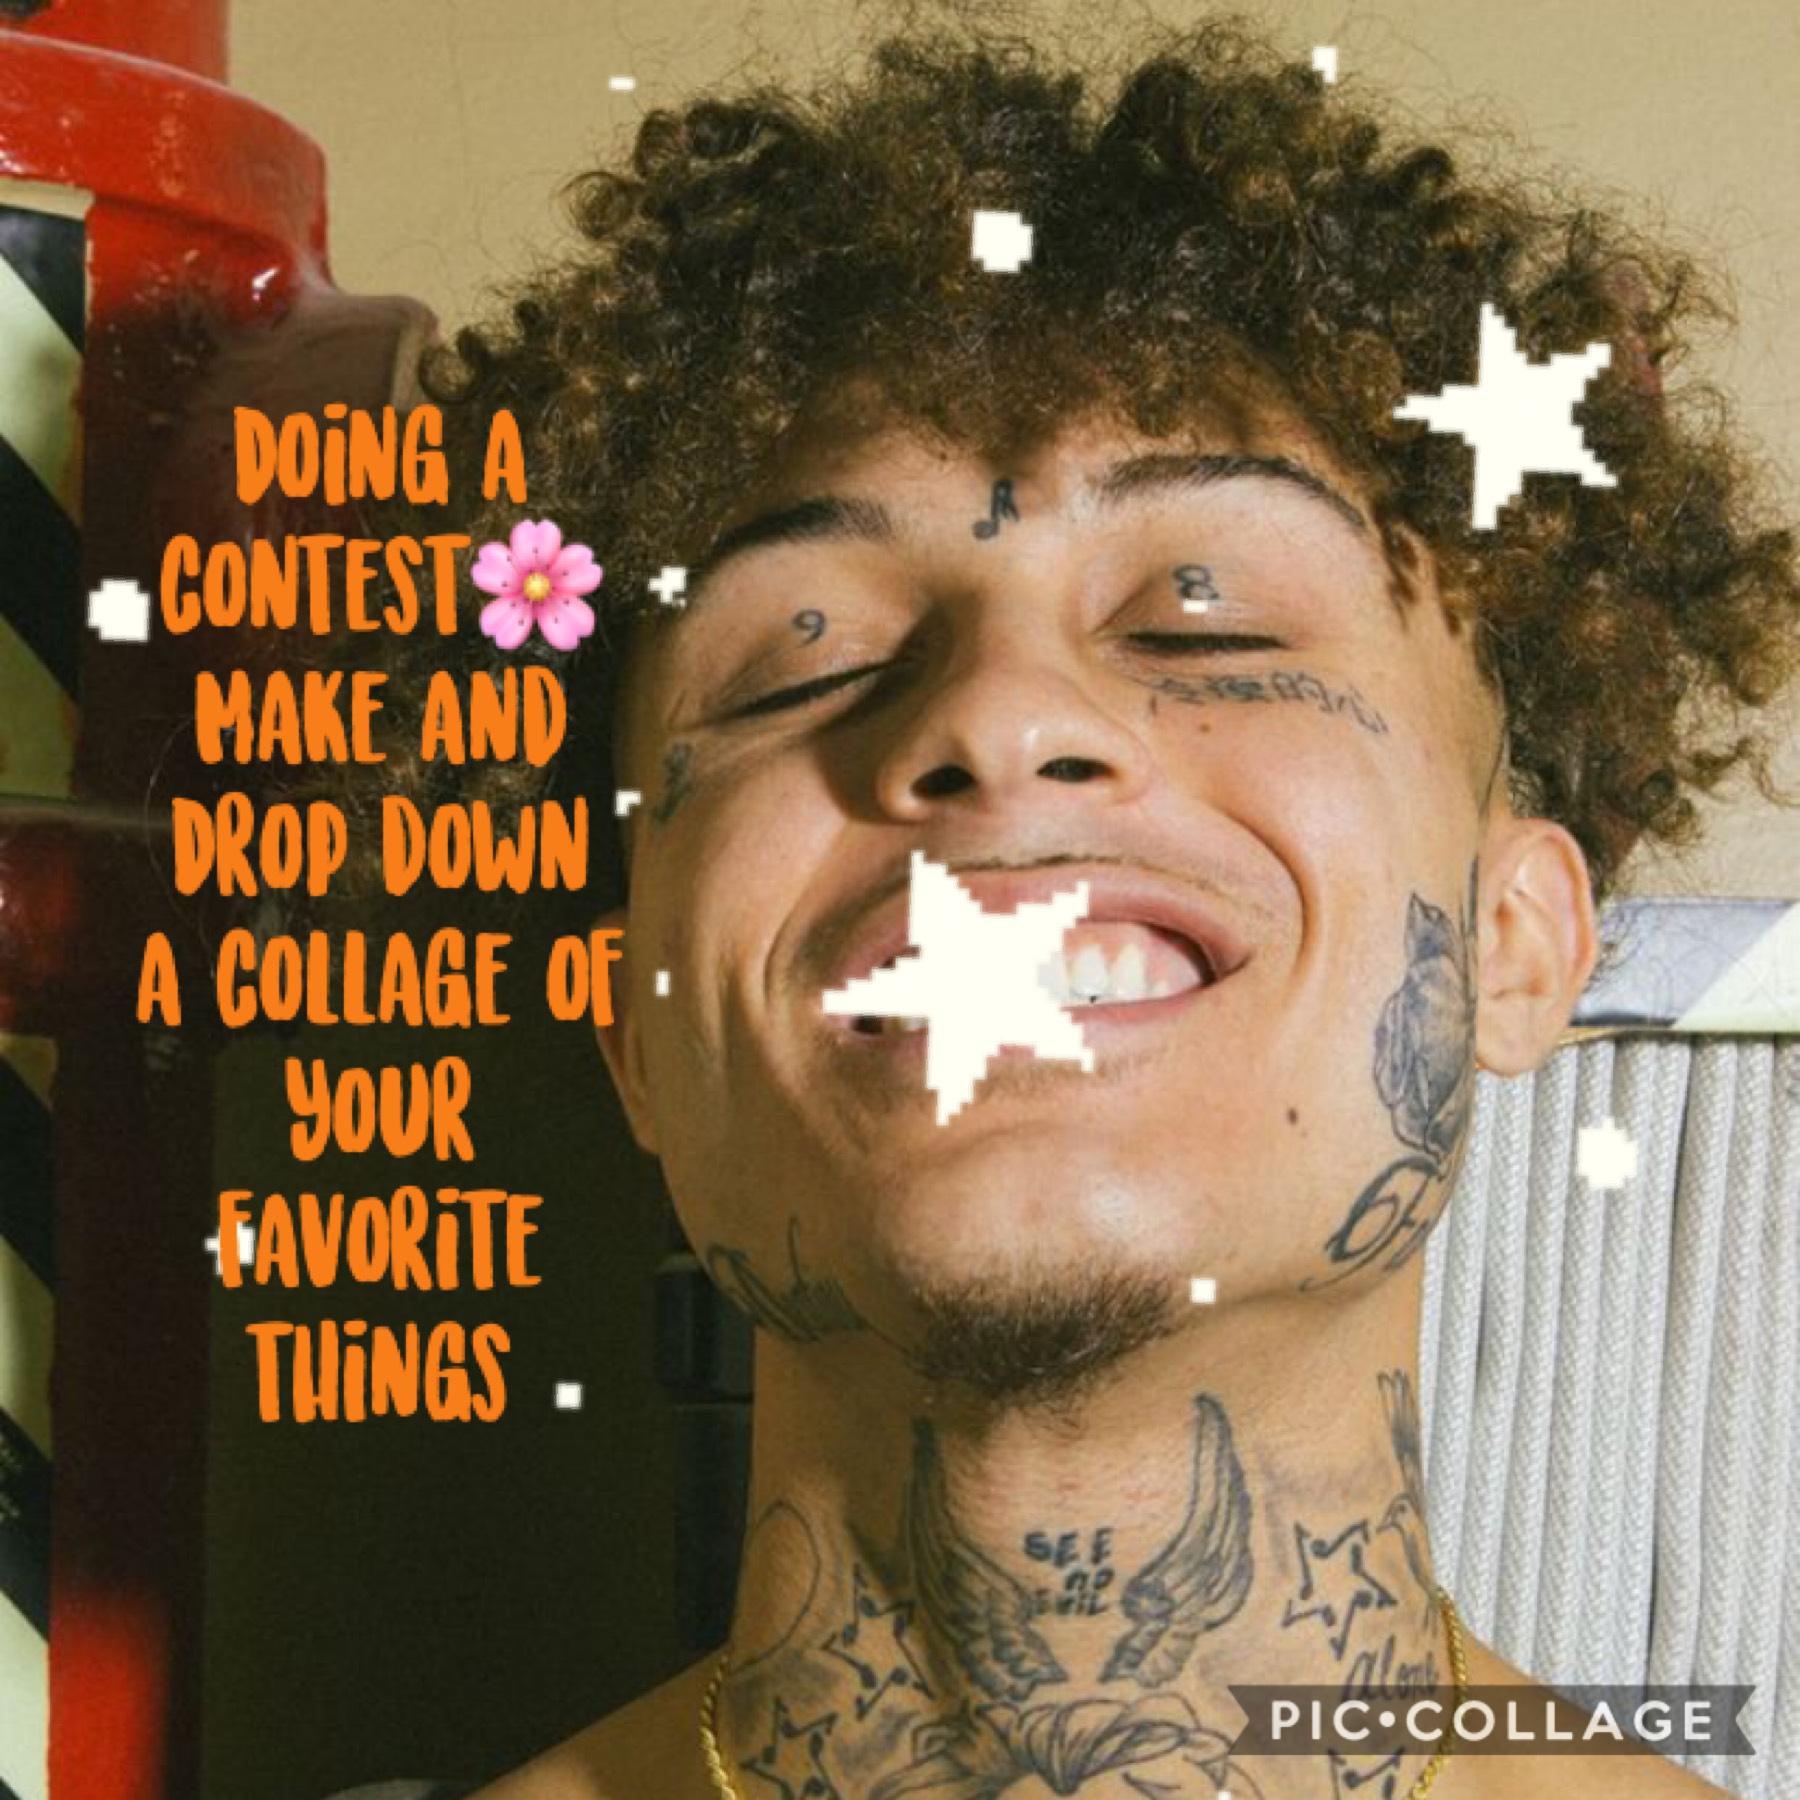 Drop down and make an collage of your favorite things in the comments👑 posting winner in the comments😌